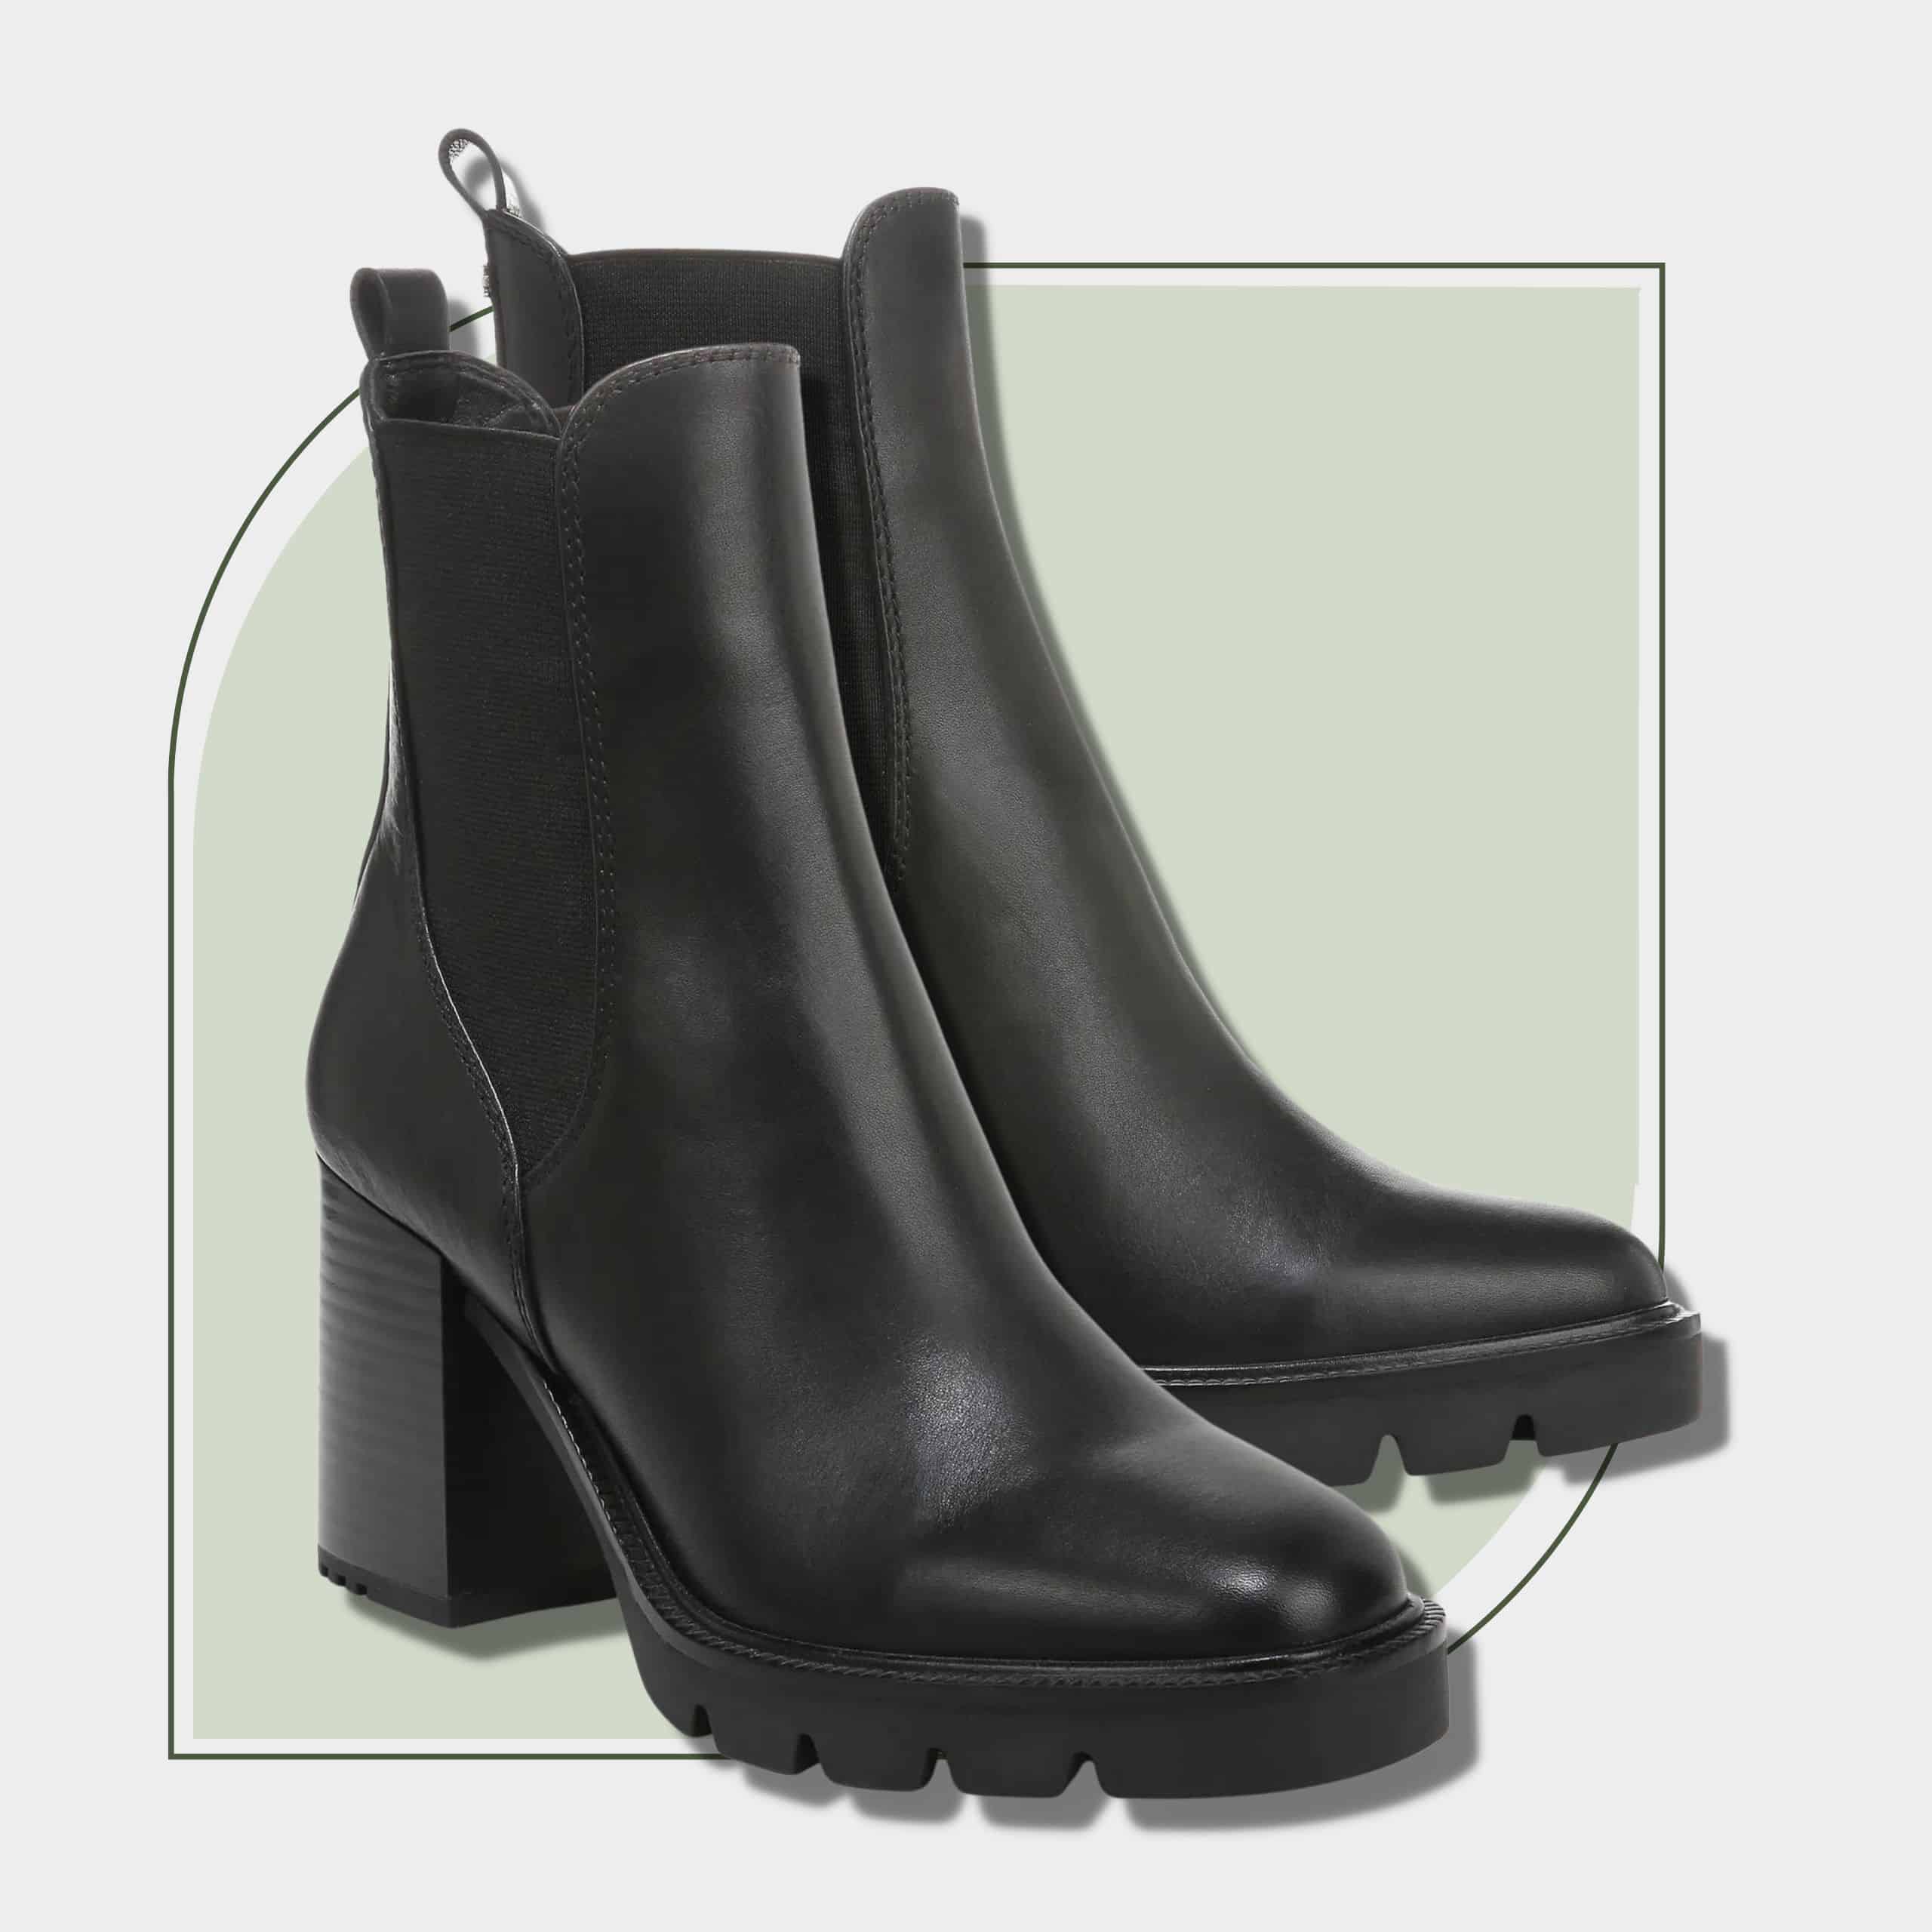 Effortless Chic Winter Capsule Wardrobe-Black Ankle Boots